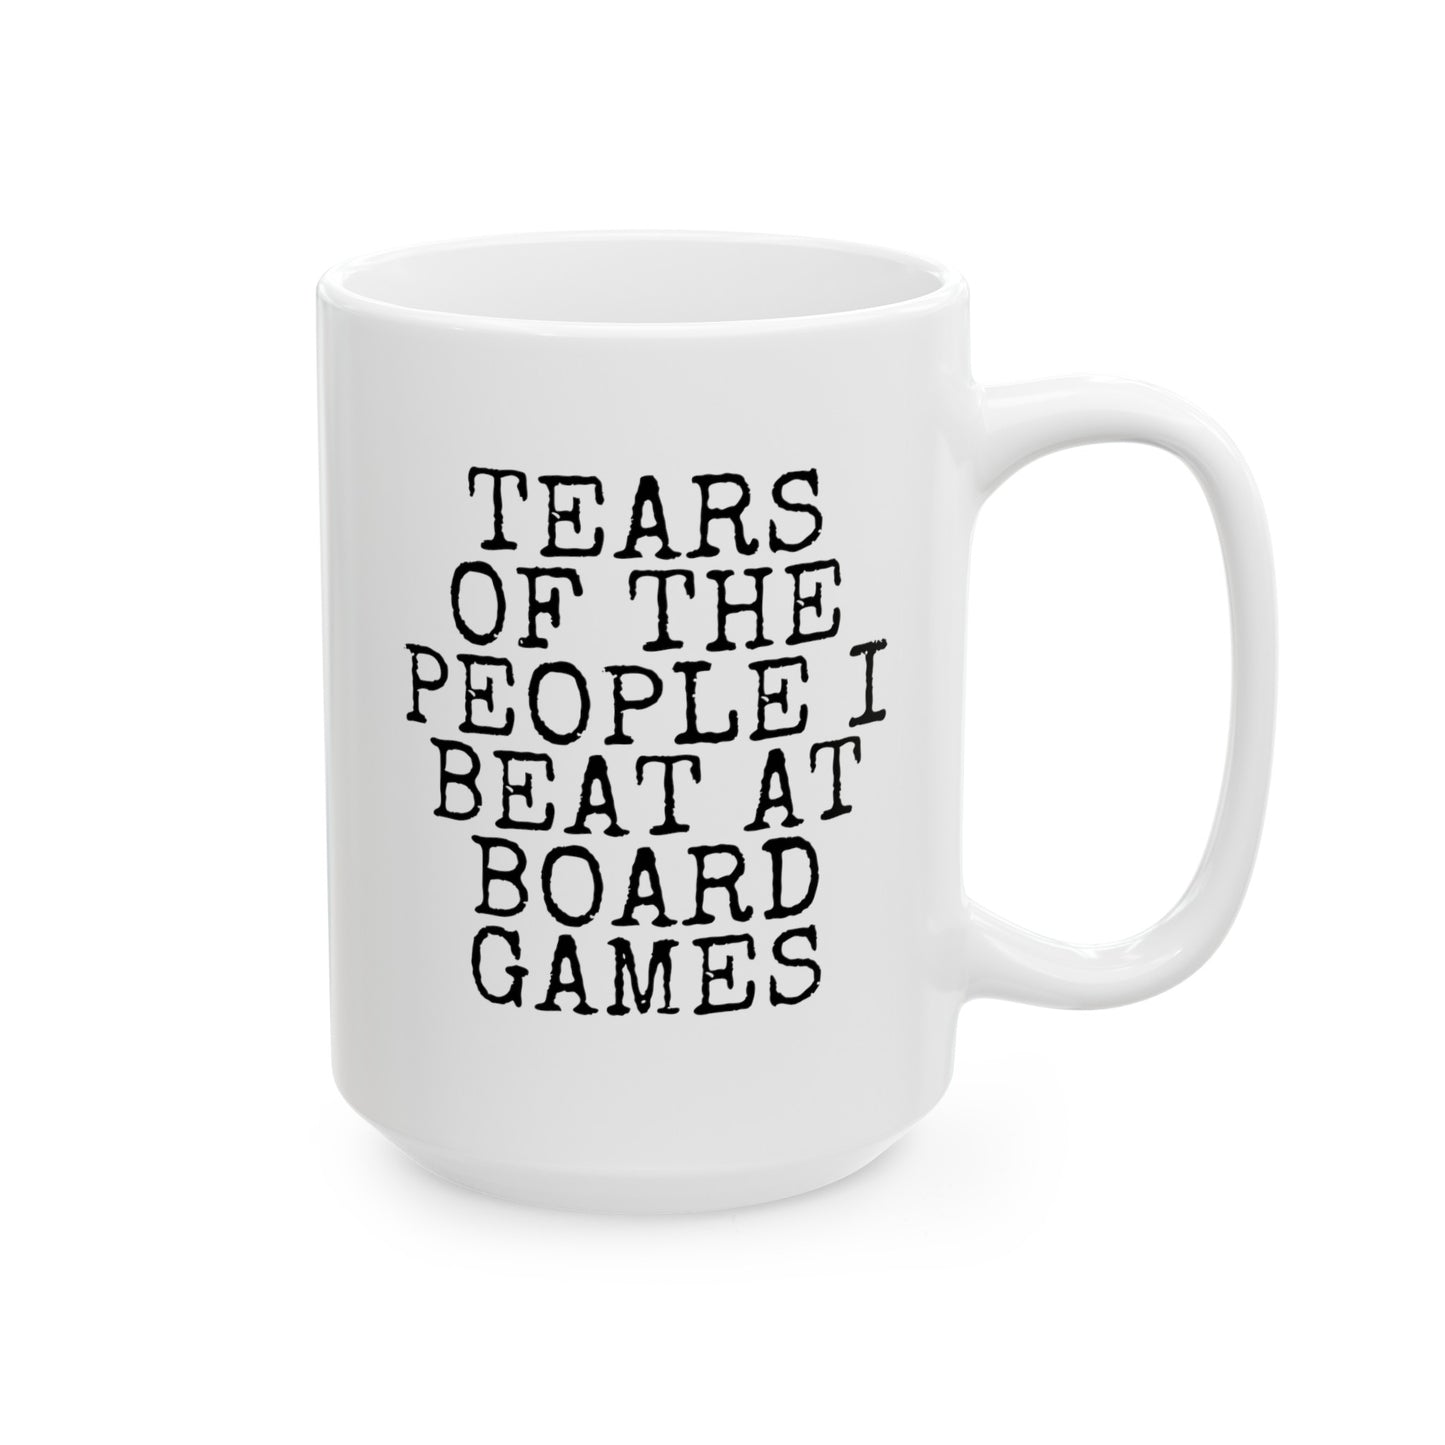 Tears Of The People I Beat At Board Games 15oz white funny large coffee mug gift for friends player him her quote waveywares wavey wares wavywares wavy wares